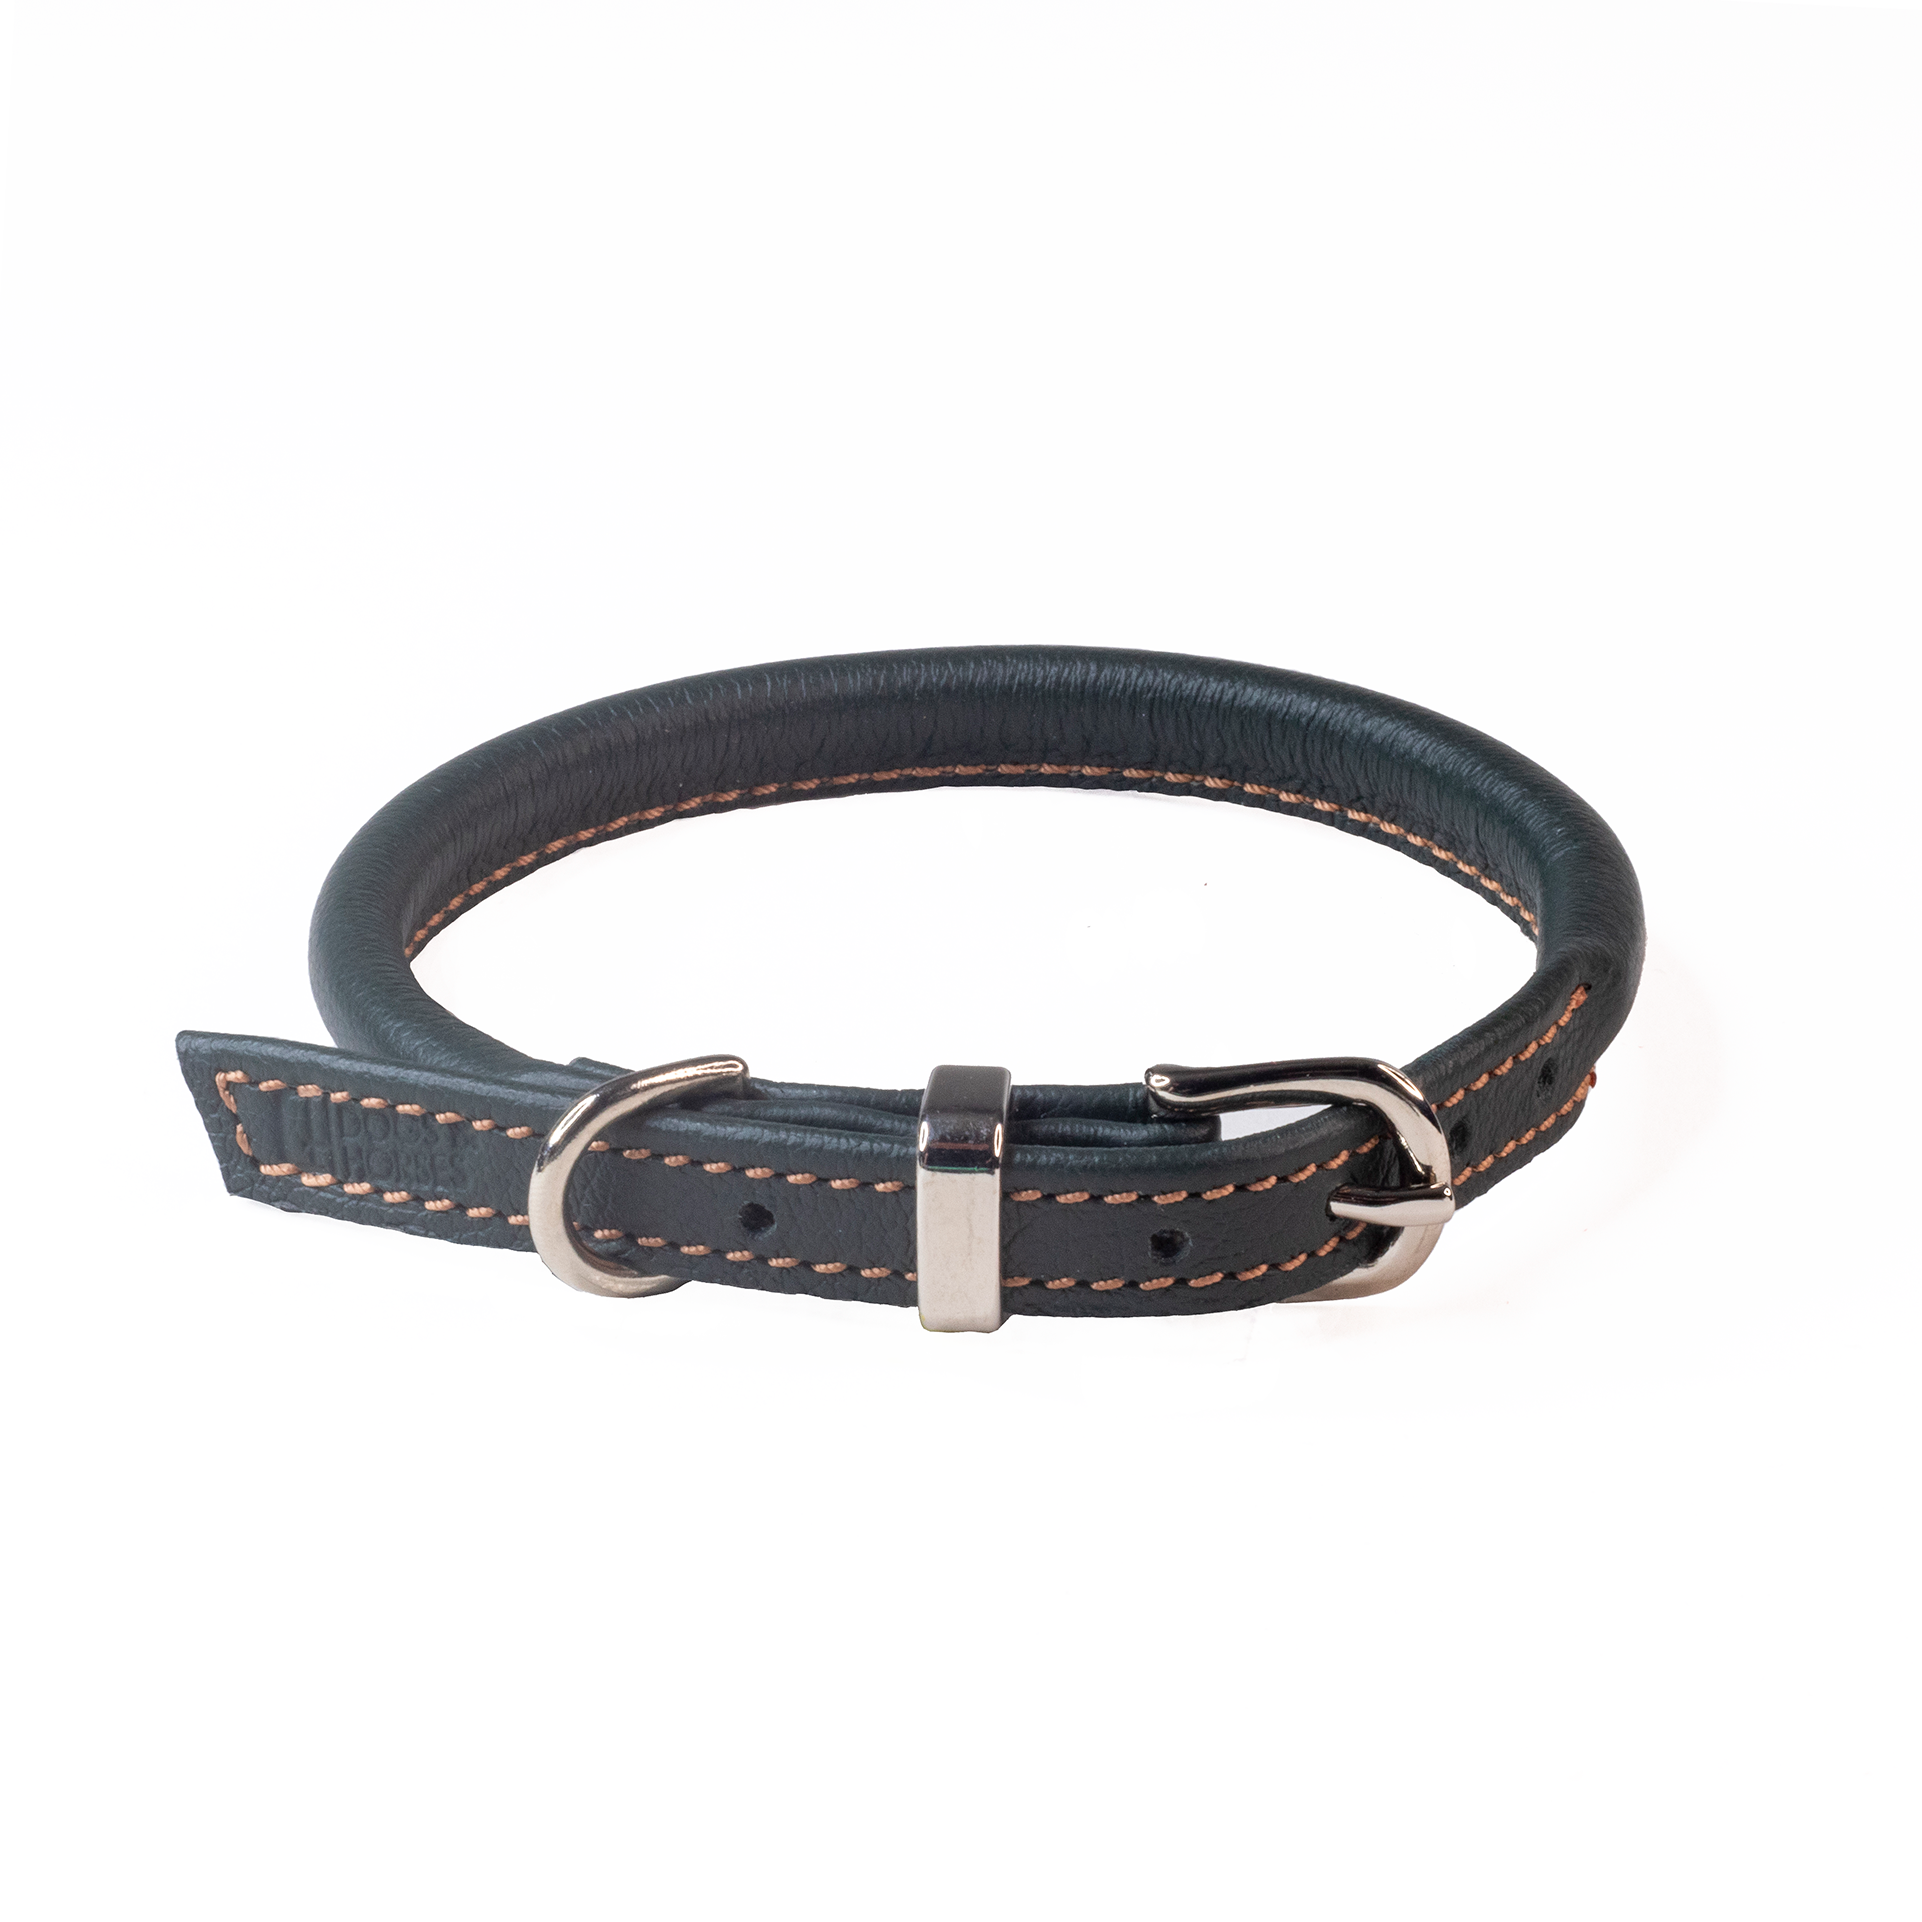 The Dogs and Horses Racing Green Rolled leather Collar is ideal for dogs with long or curly coats. The rolled construction helps to prevent knots forming in the coat (lookin&